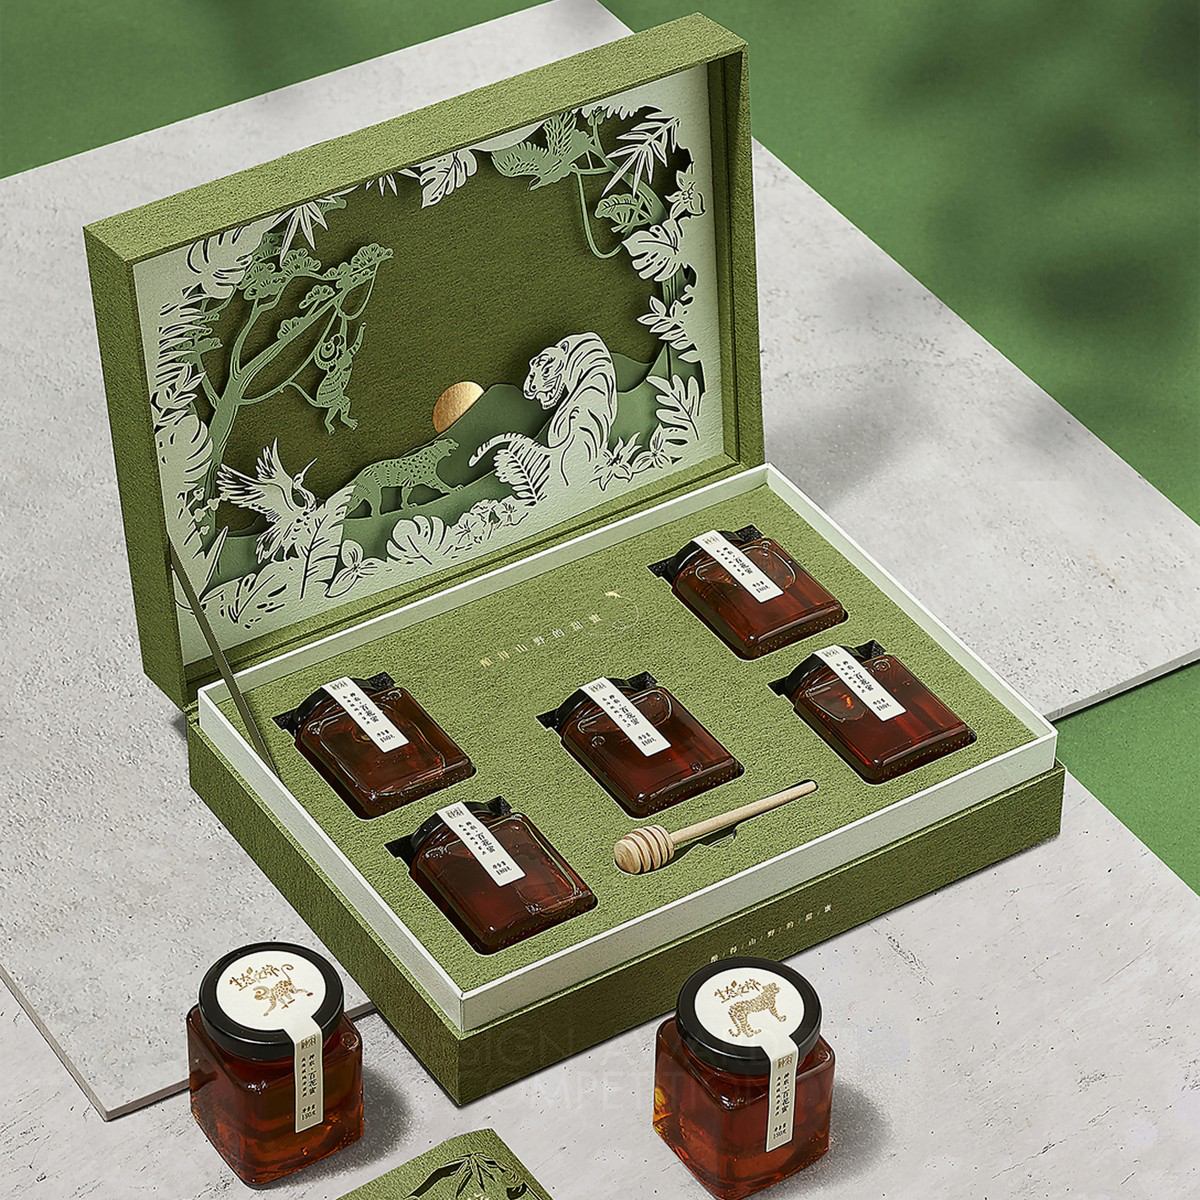 Pufine Creative wins Silver at the prestigious A' Packaging Design Award with Ecological Journey Gift Box Honey.